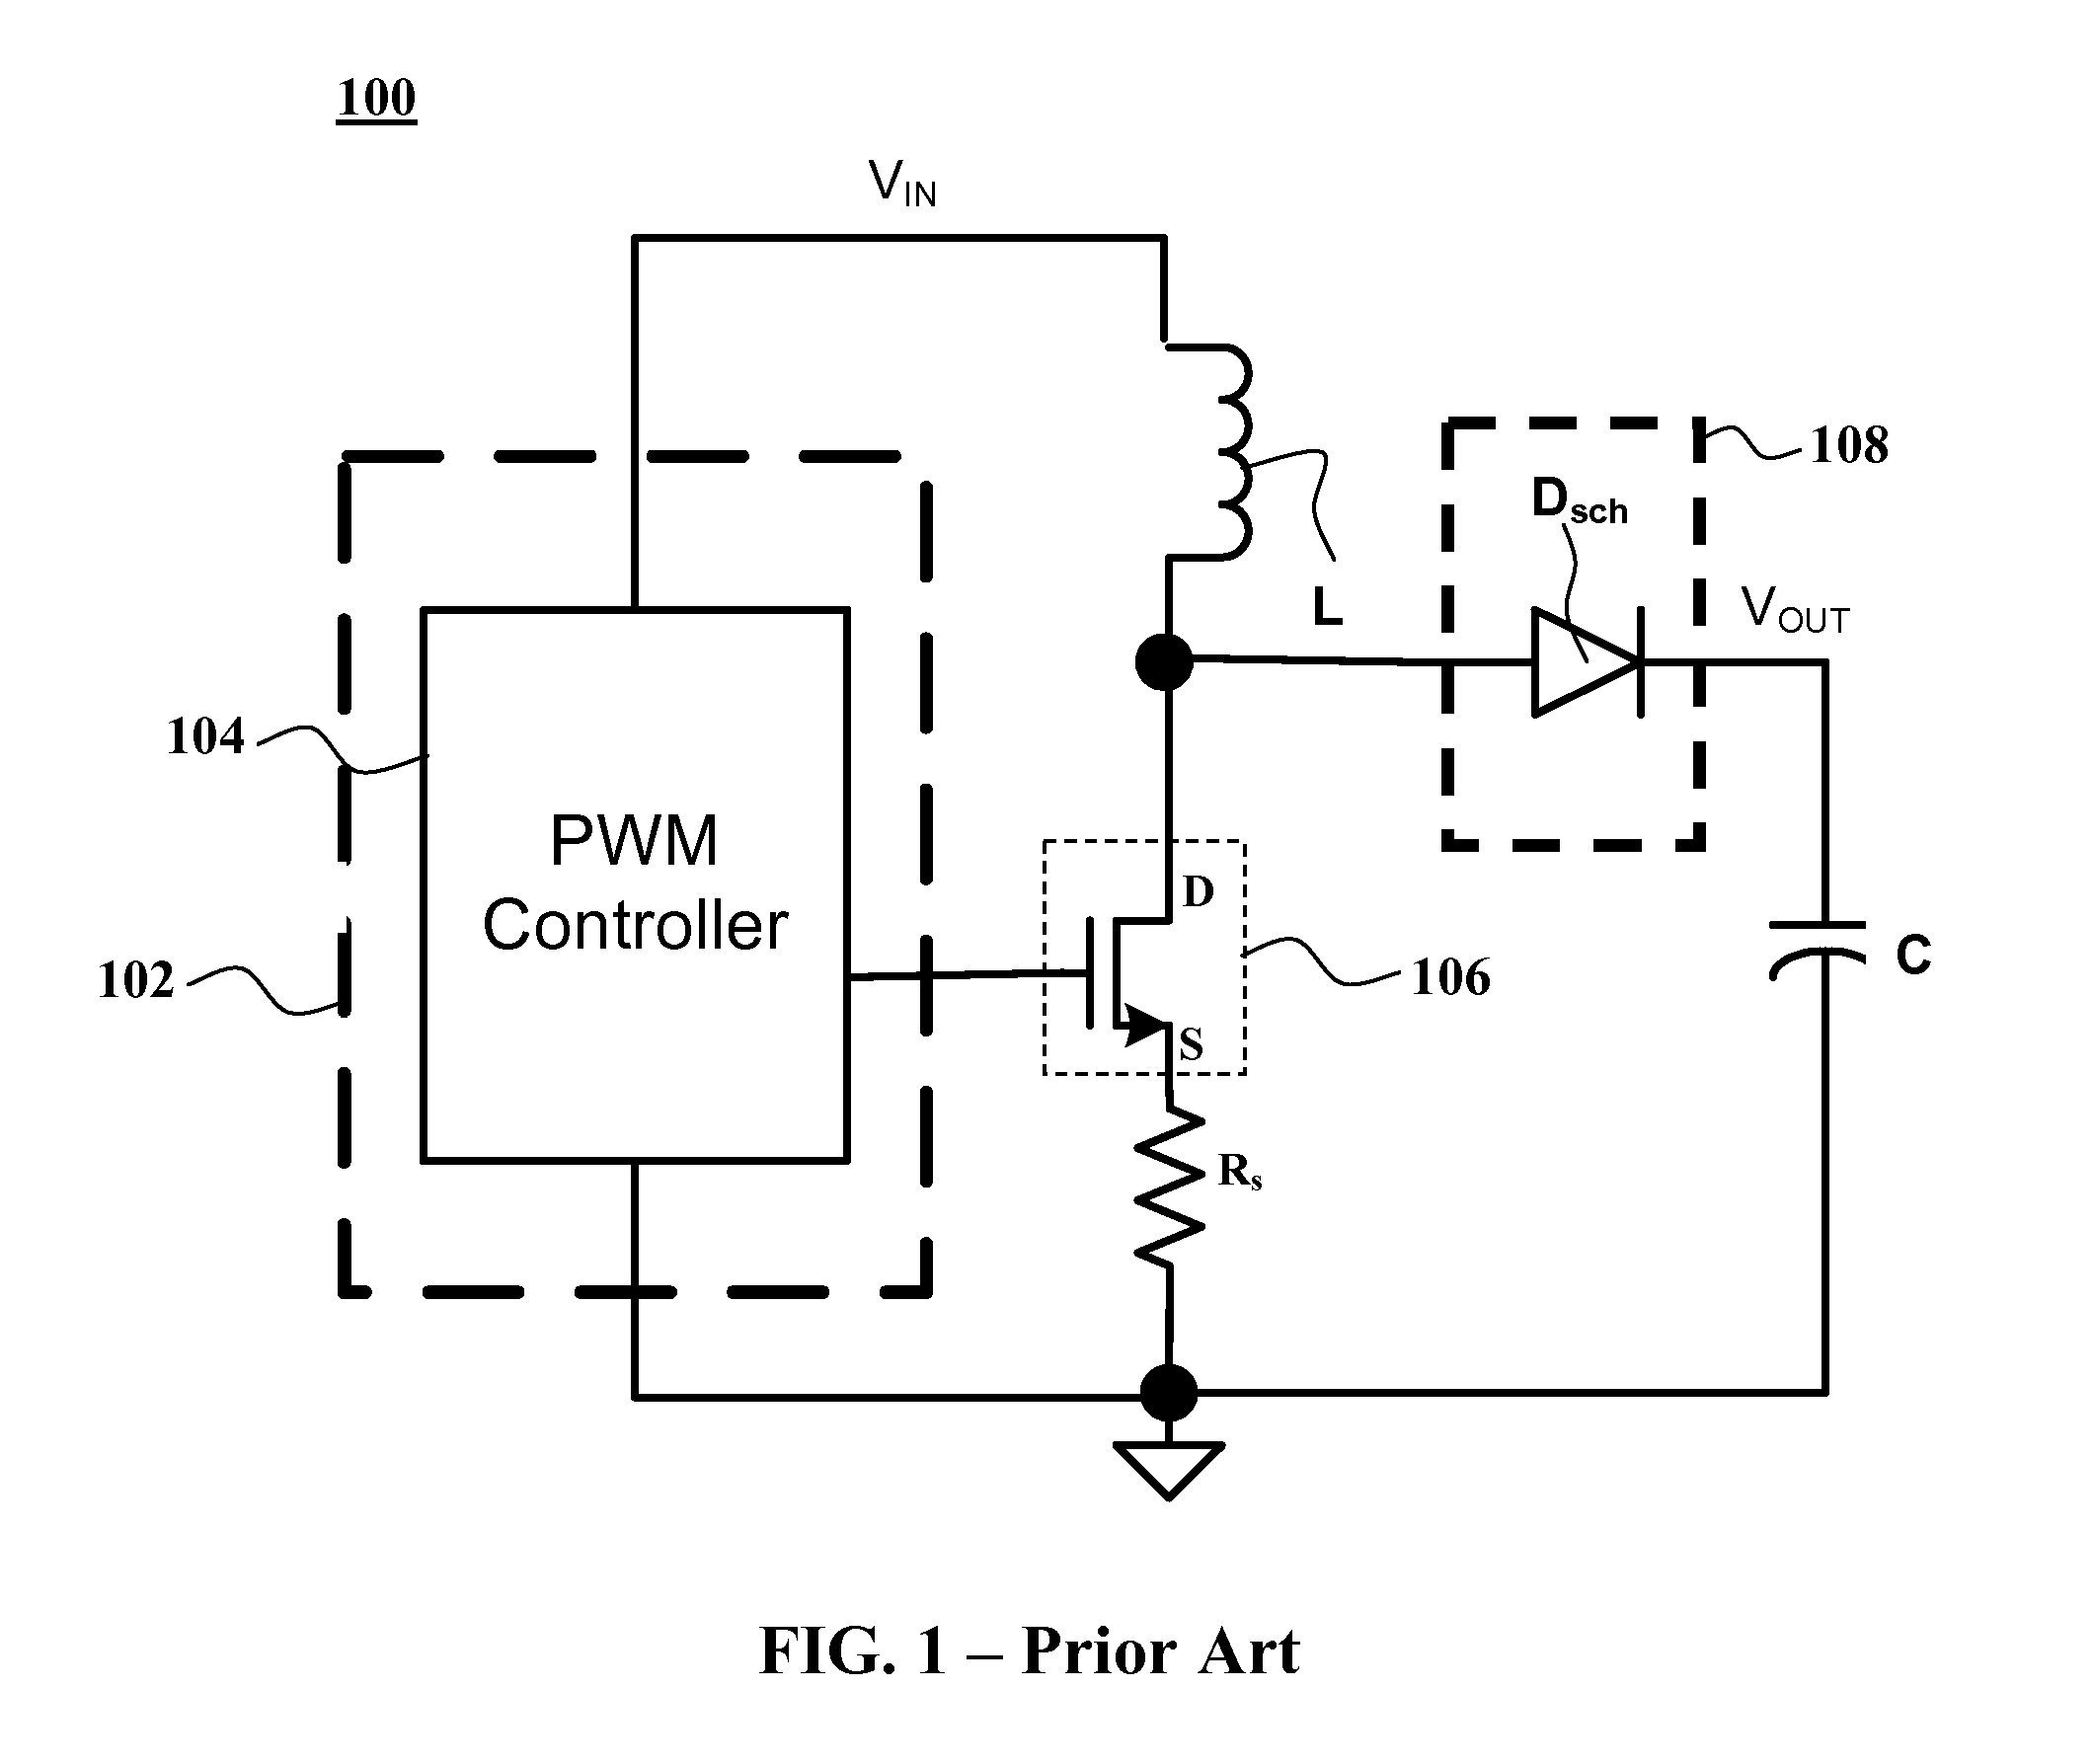 High voltage and high power boost converter with co-packaged Schottky diode